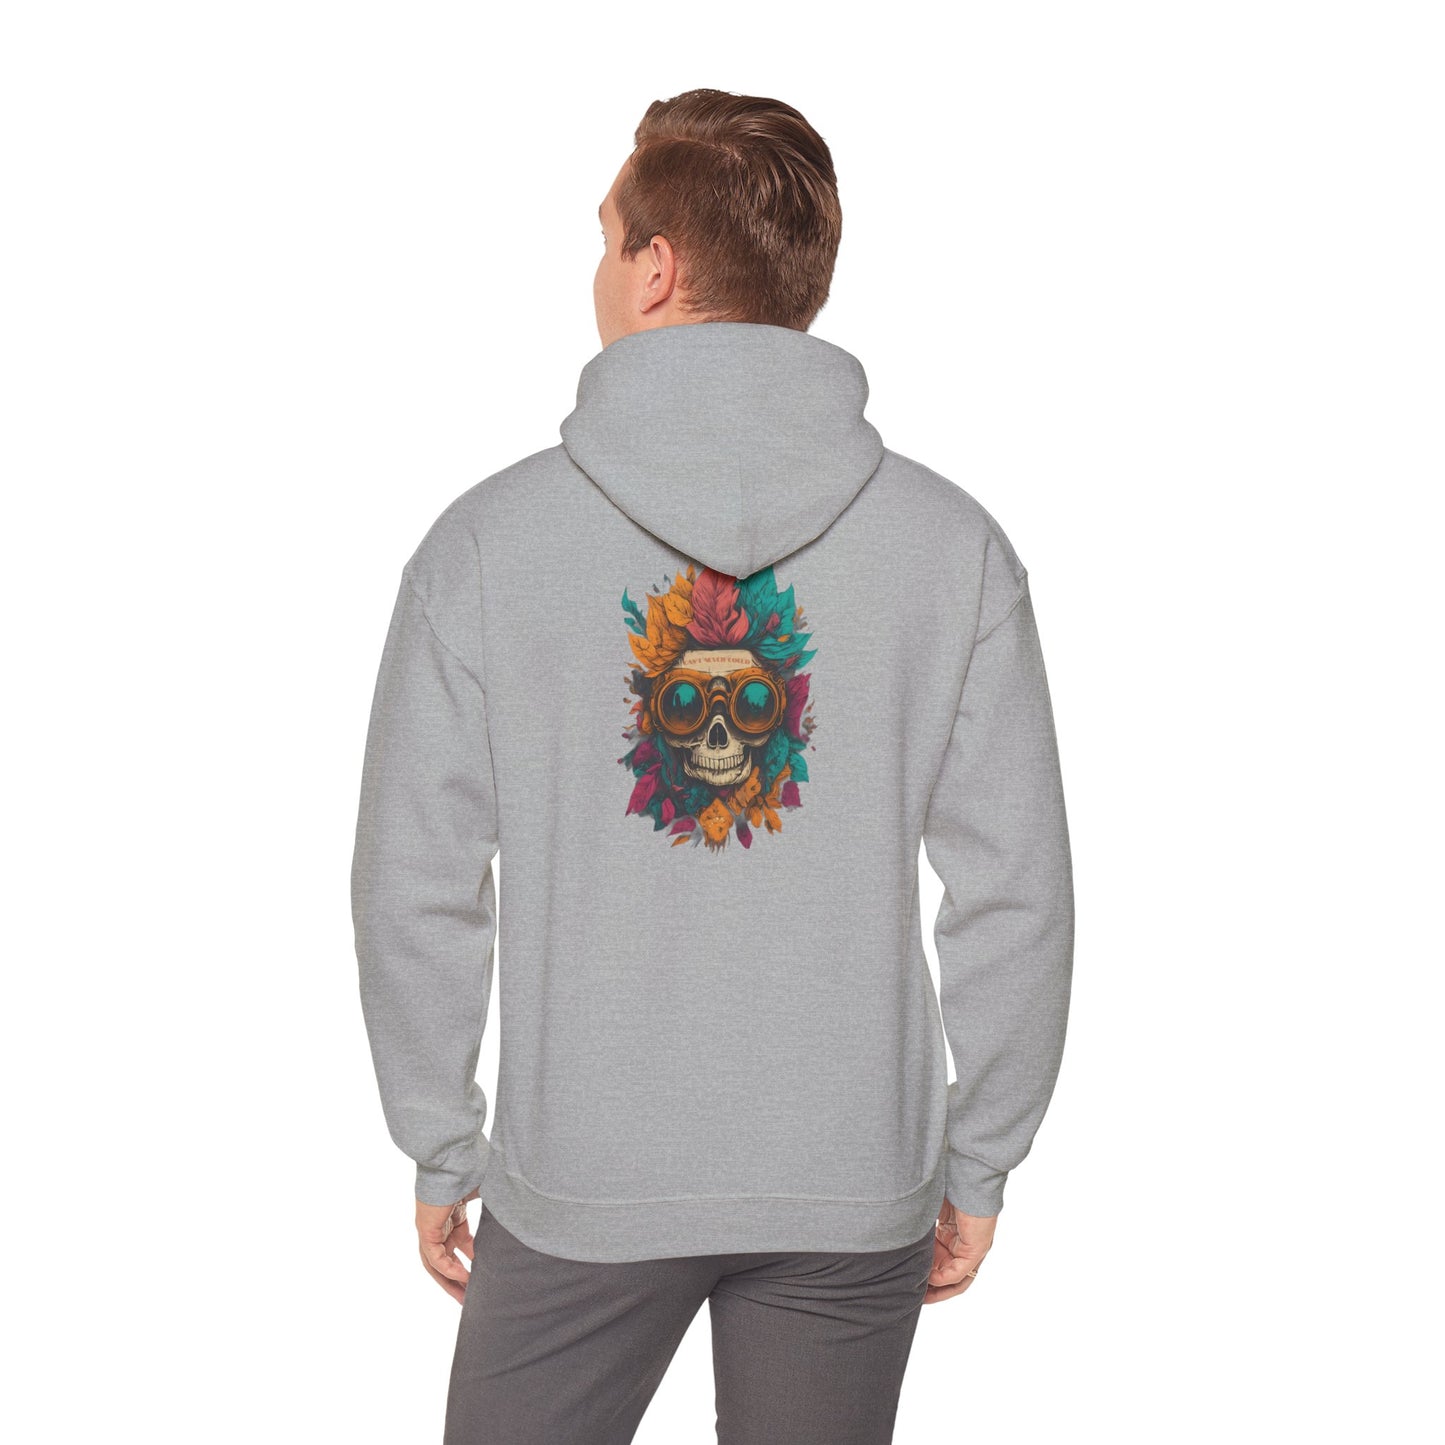 Can't Never Could Hooded Sweatshirt